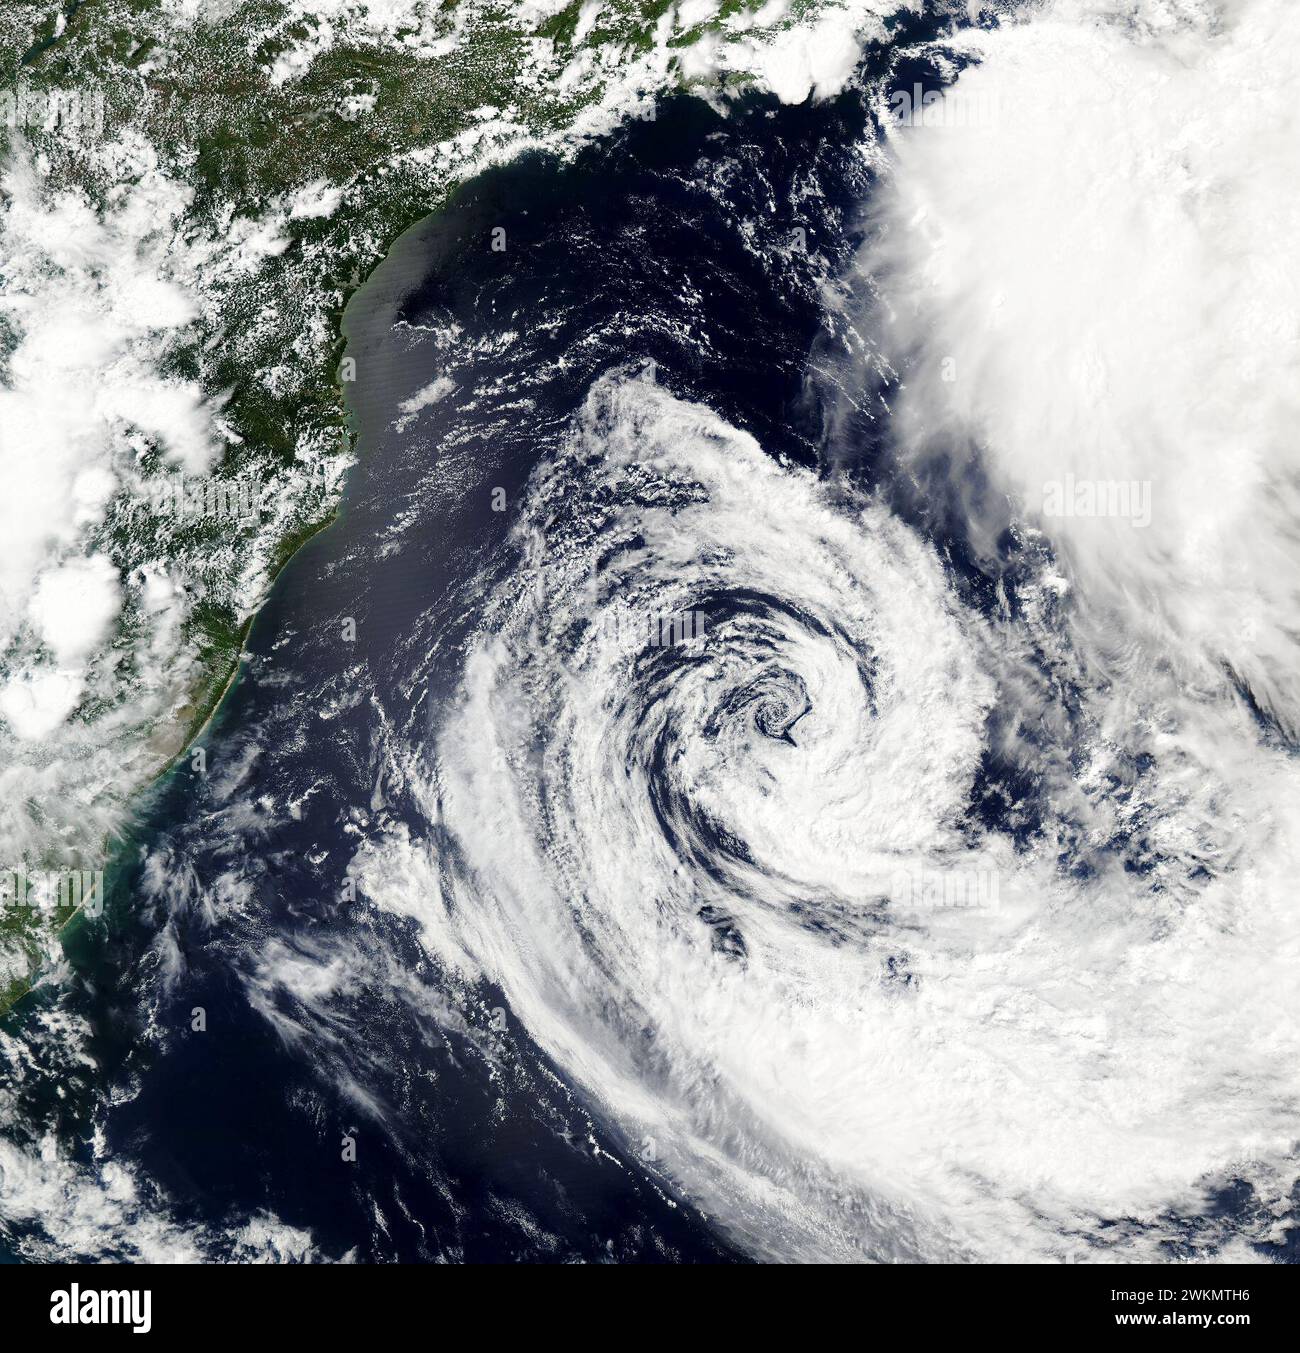 February 21, 2024: Brazil: Tropical storms seldom roam in the South Atlantic Ocean. But in mid-February 2024, one such storm formed off the coast of Brazil. The disturbance began to develop as a stalled front of low pressure on February 15. Tthe front formed into a subtropical depression on February 16 after being fed by a plume of tropical moisture that plunged south. The depression continued to intensify and move south, on February 19, the Brazilian Navy Hydrographic Center upgraded it to Tropical Storm Akara. At the time, the storm carried sustained winds of up to 64 kilometers (40 miles) p Stock Photo